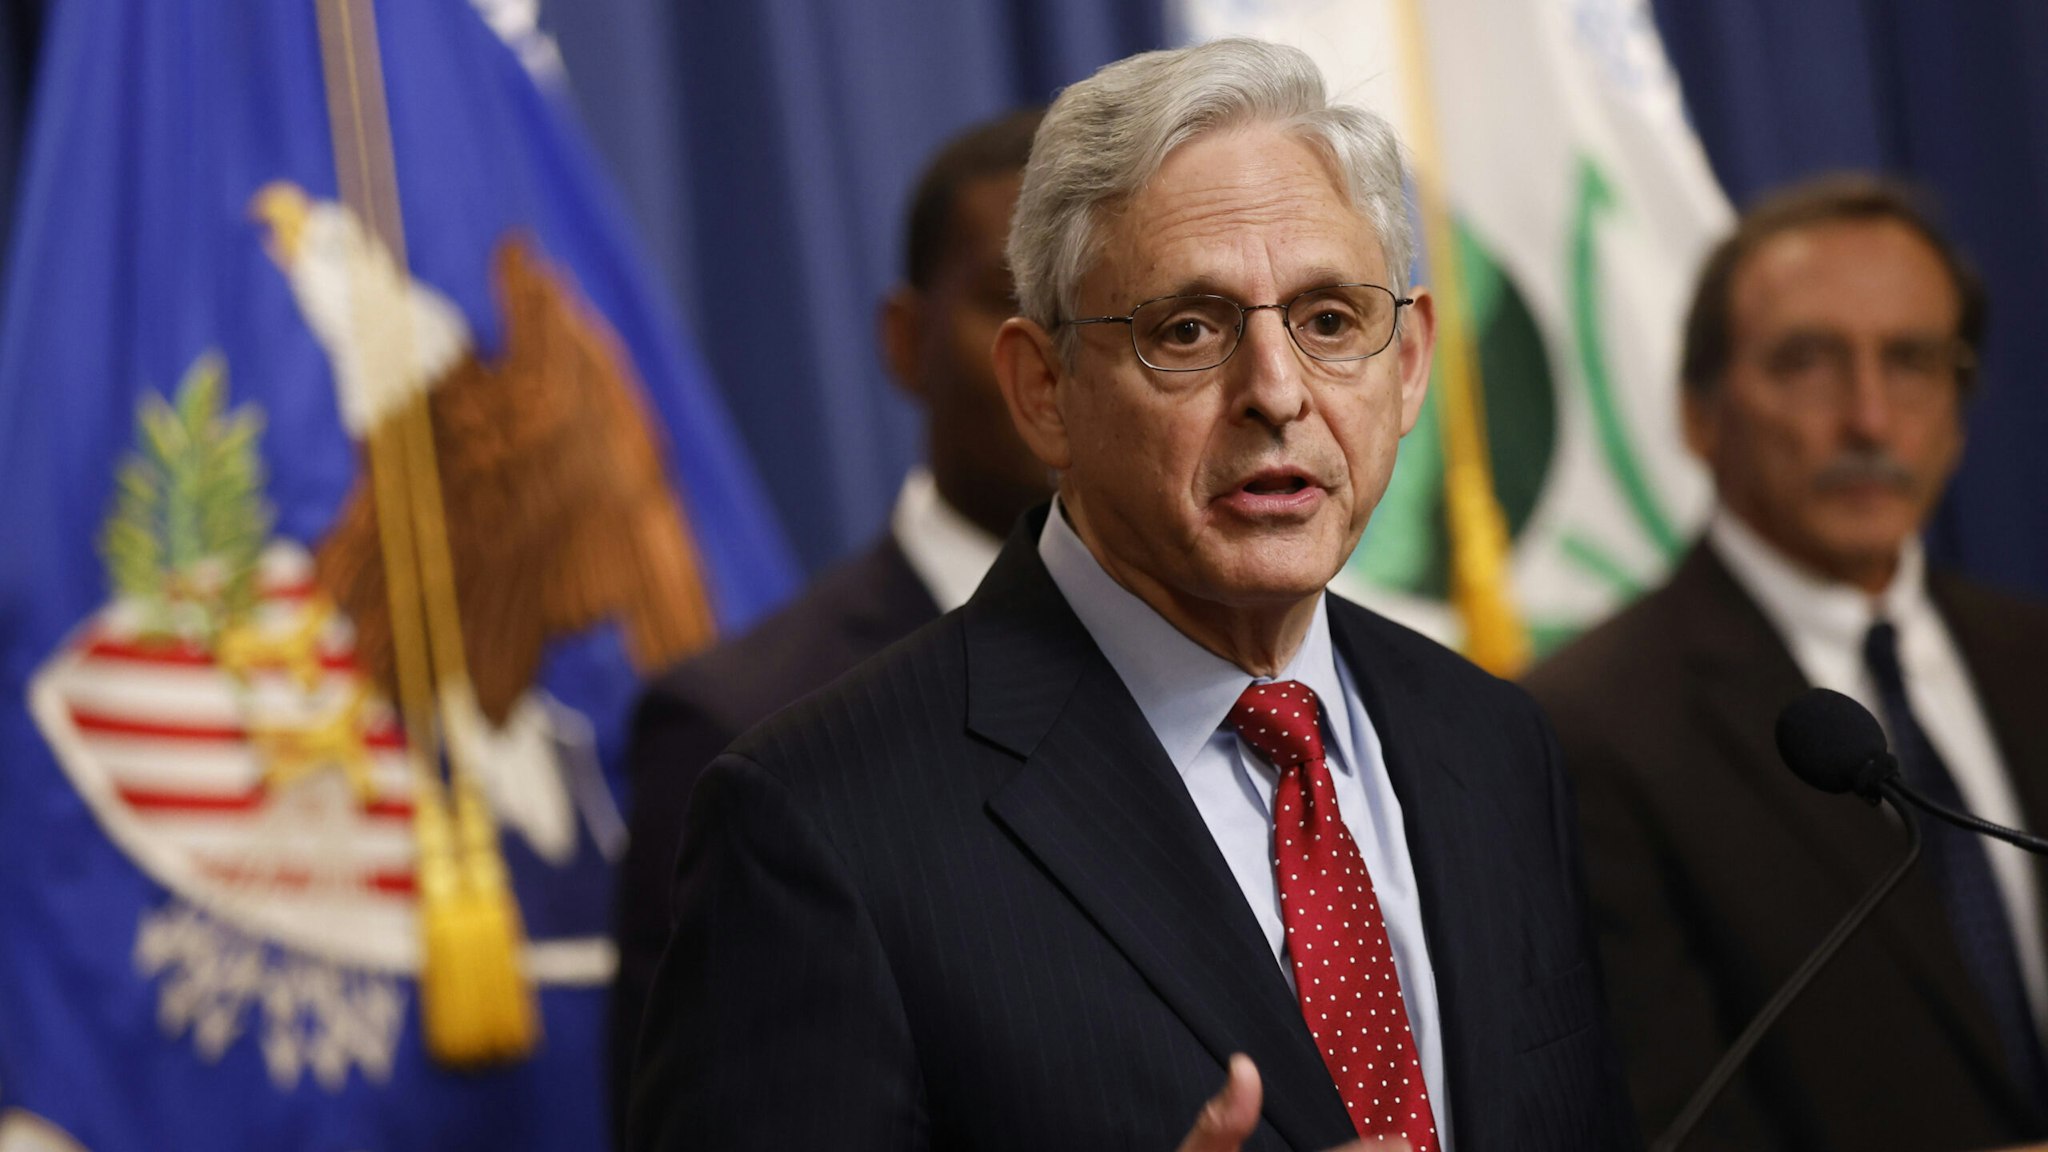 Merrick Garland, U.S. attorney general, speaks during a news conference at the Department of Justice (DOJ) in Washington, D.C., U.S., on Thursday, May 5, 2022.